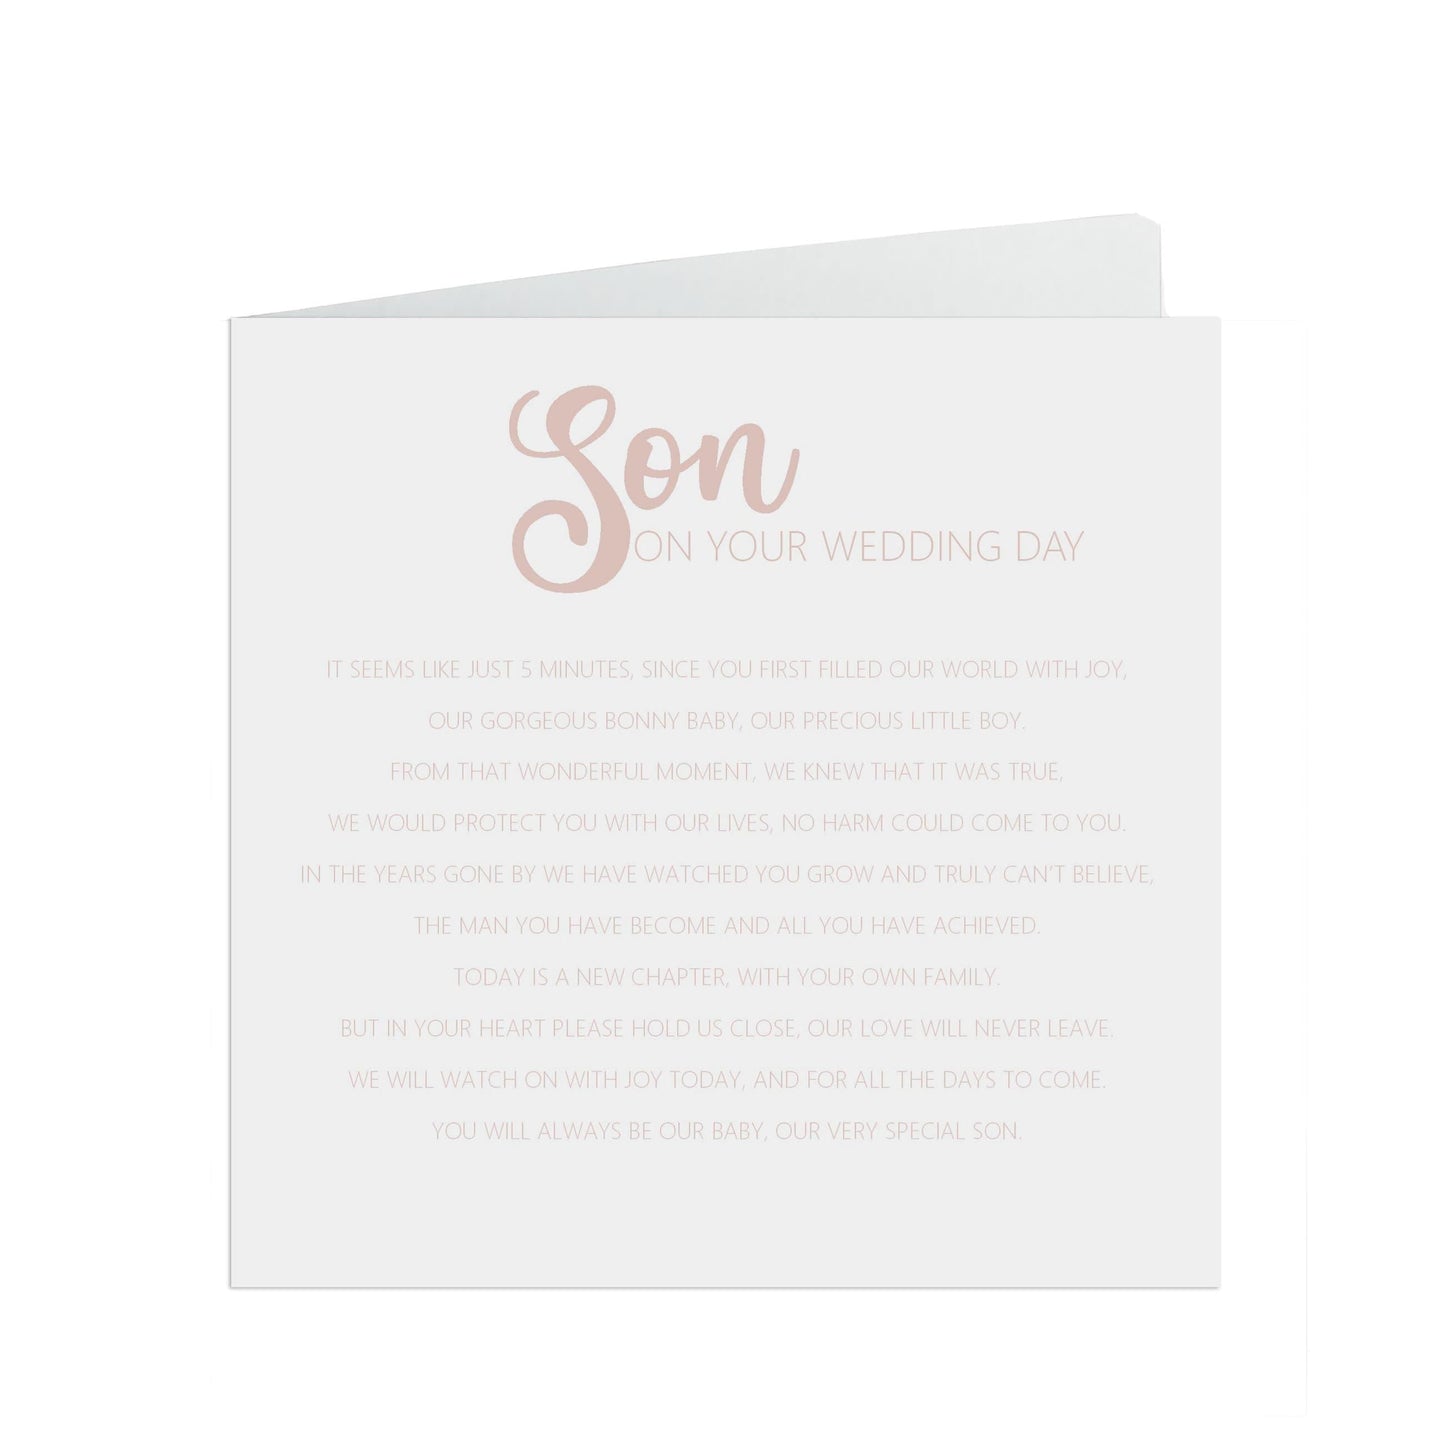  Son On Your Wedding Day Card, Rose Gold Effect 6x6 Inches In Size With A White Envelope by PMPRINTED 